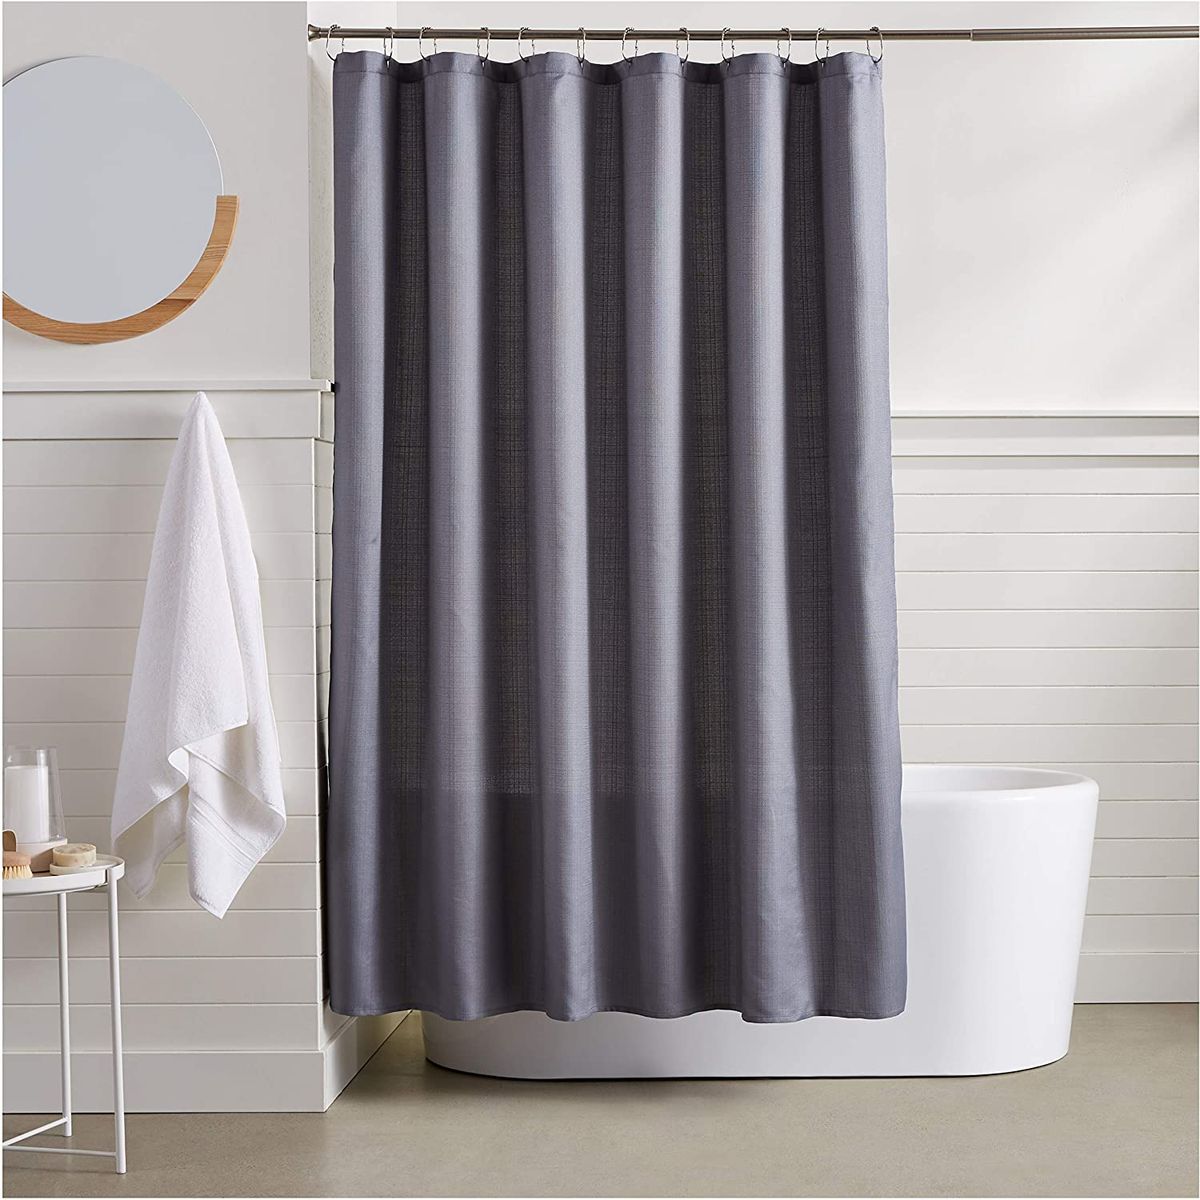 Black Shower Curtain Bathroom Waterproof Shower Curtain Liner,Thick Polyester Bath Curtain,No Smell,No Chemical Odor,Eco Friendly,Completely Opaque,72/×72 Inch